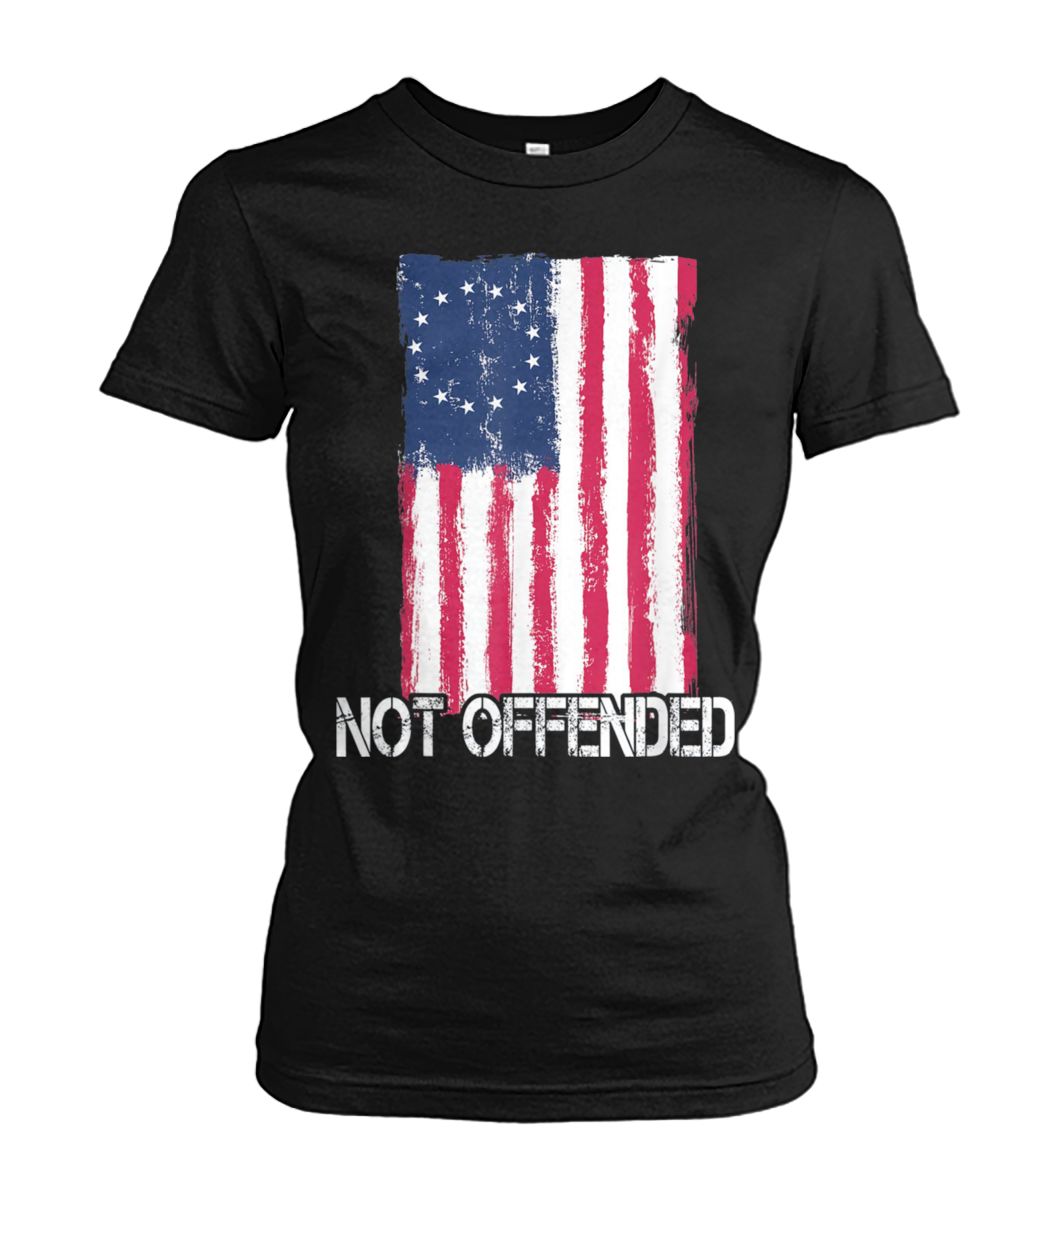 Not offended betsy ross american flag with 13 stars for protesters women's crew tee